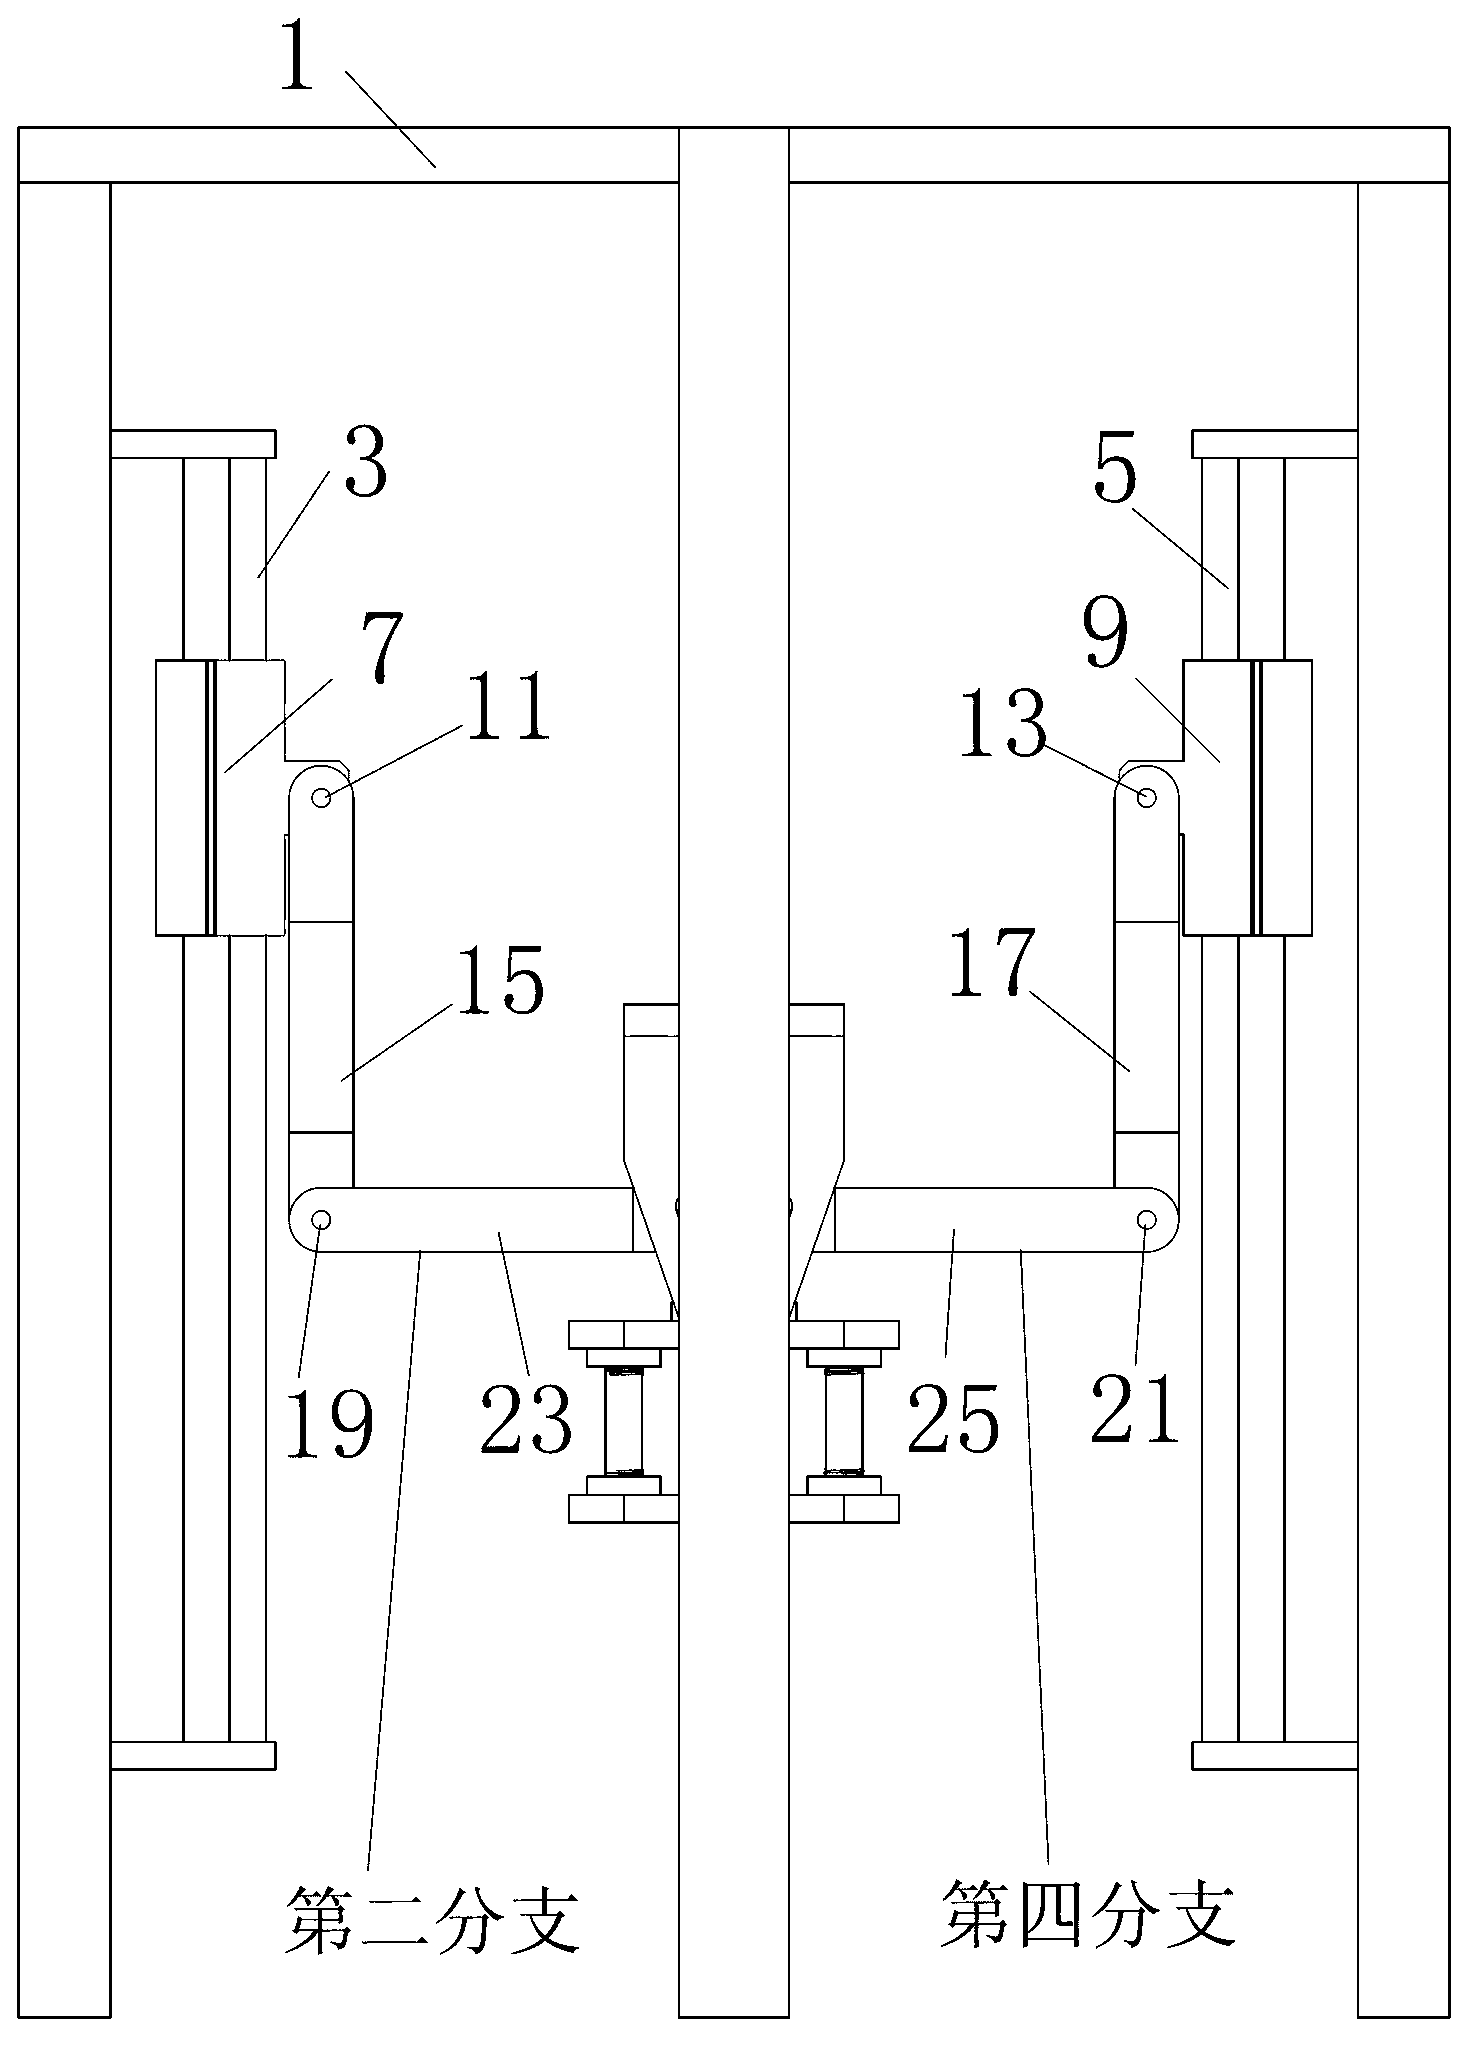 Redundant drive three-freedom-degree parallel mechanism with double motion platforms